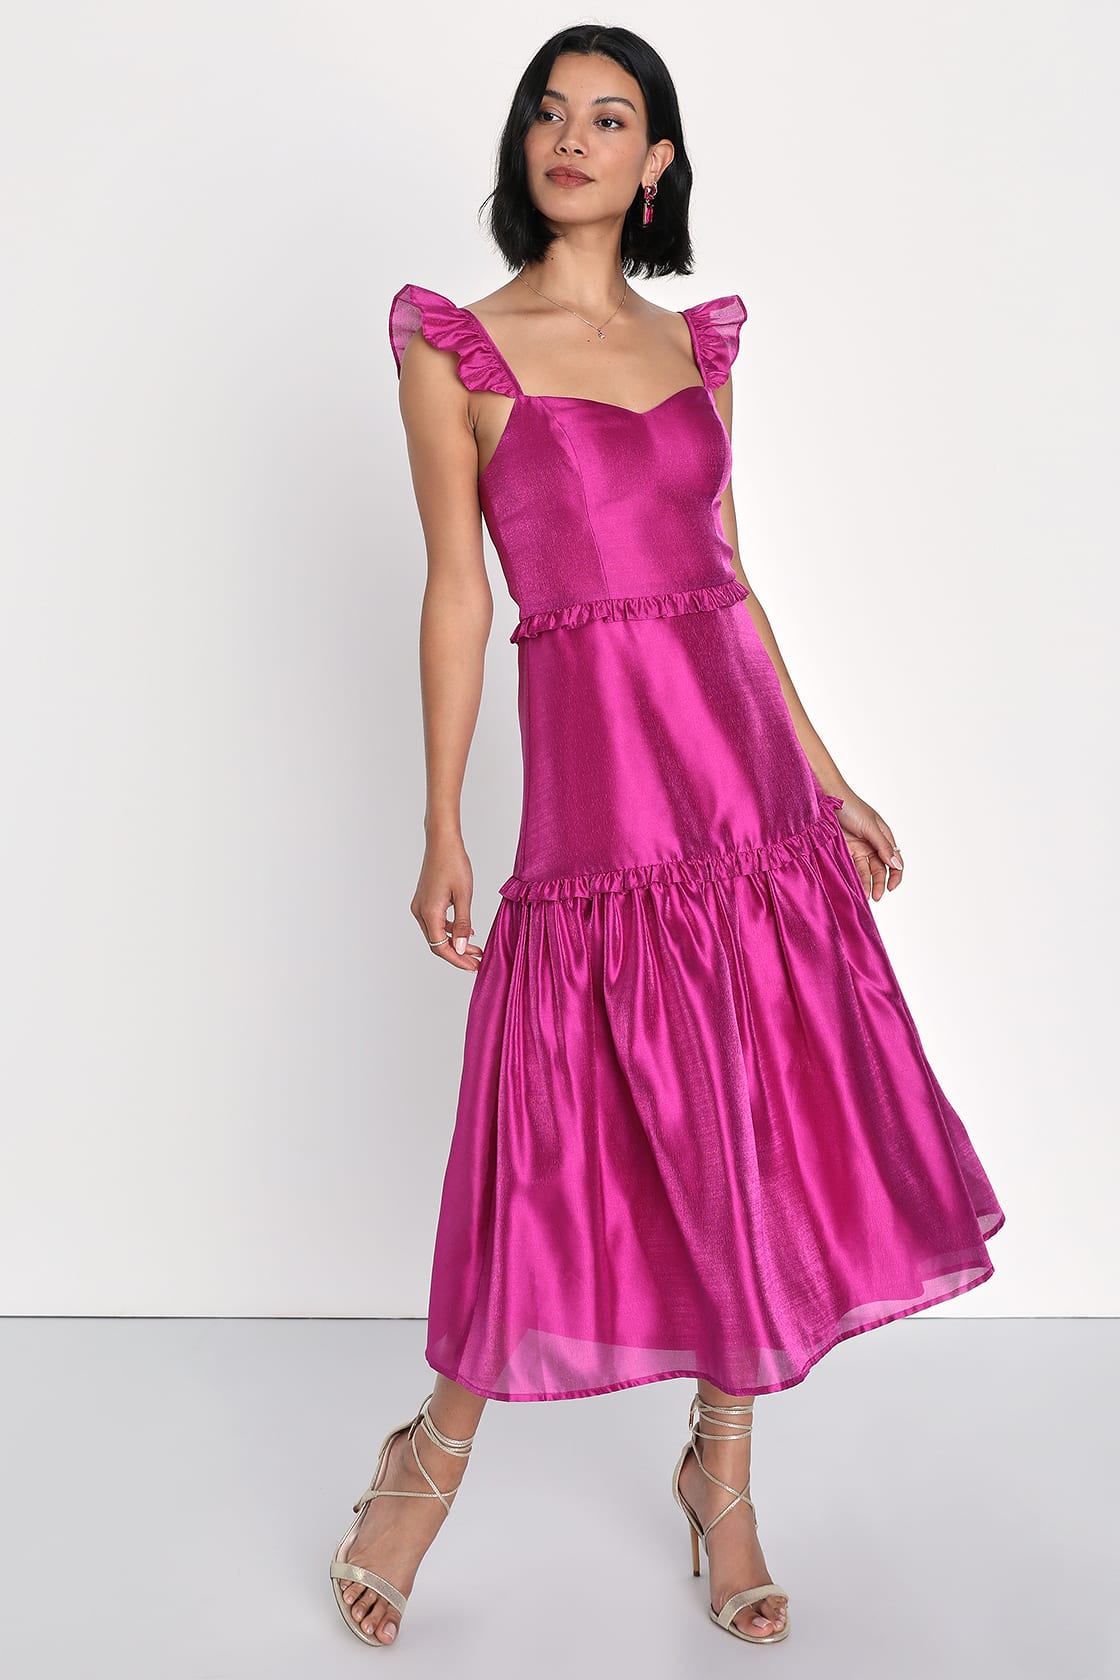 Women's Holiday Party Dresses: Shop Outfit Ideas From 2023's Top Trends -   Blog